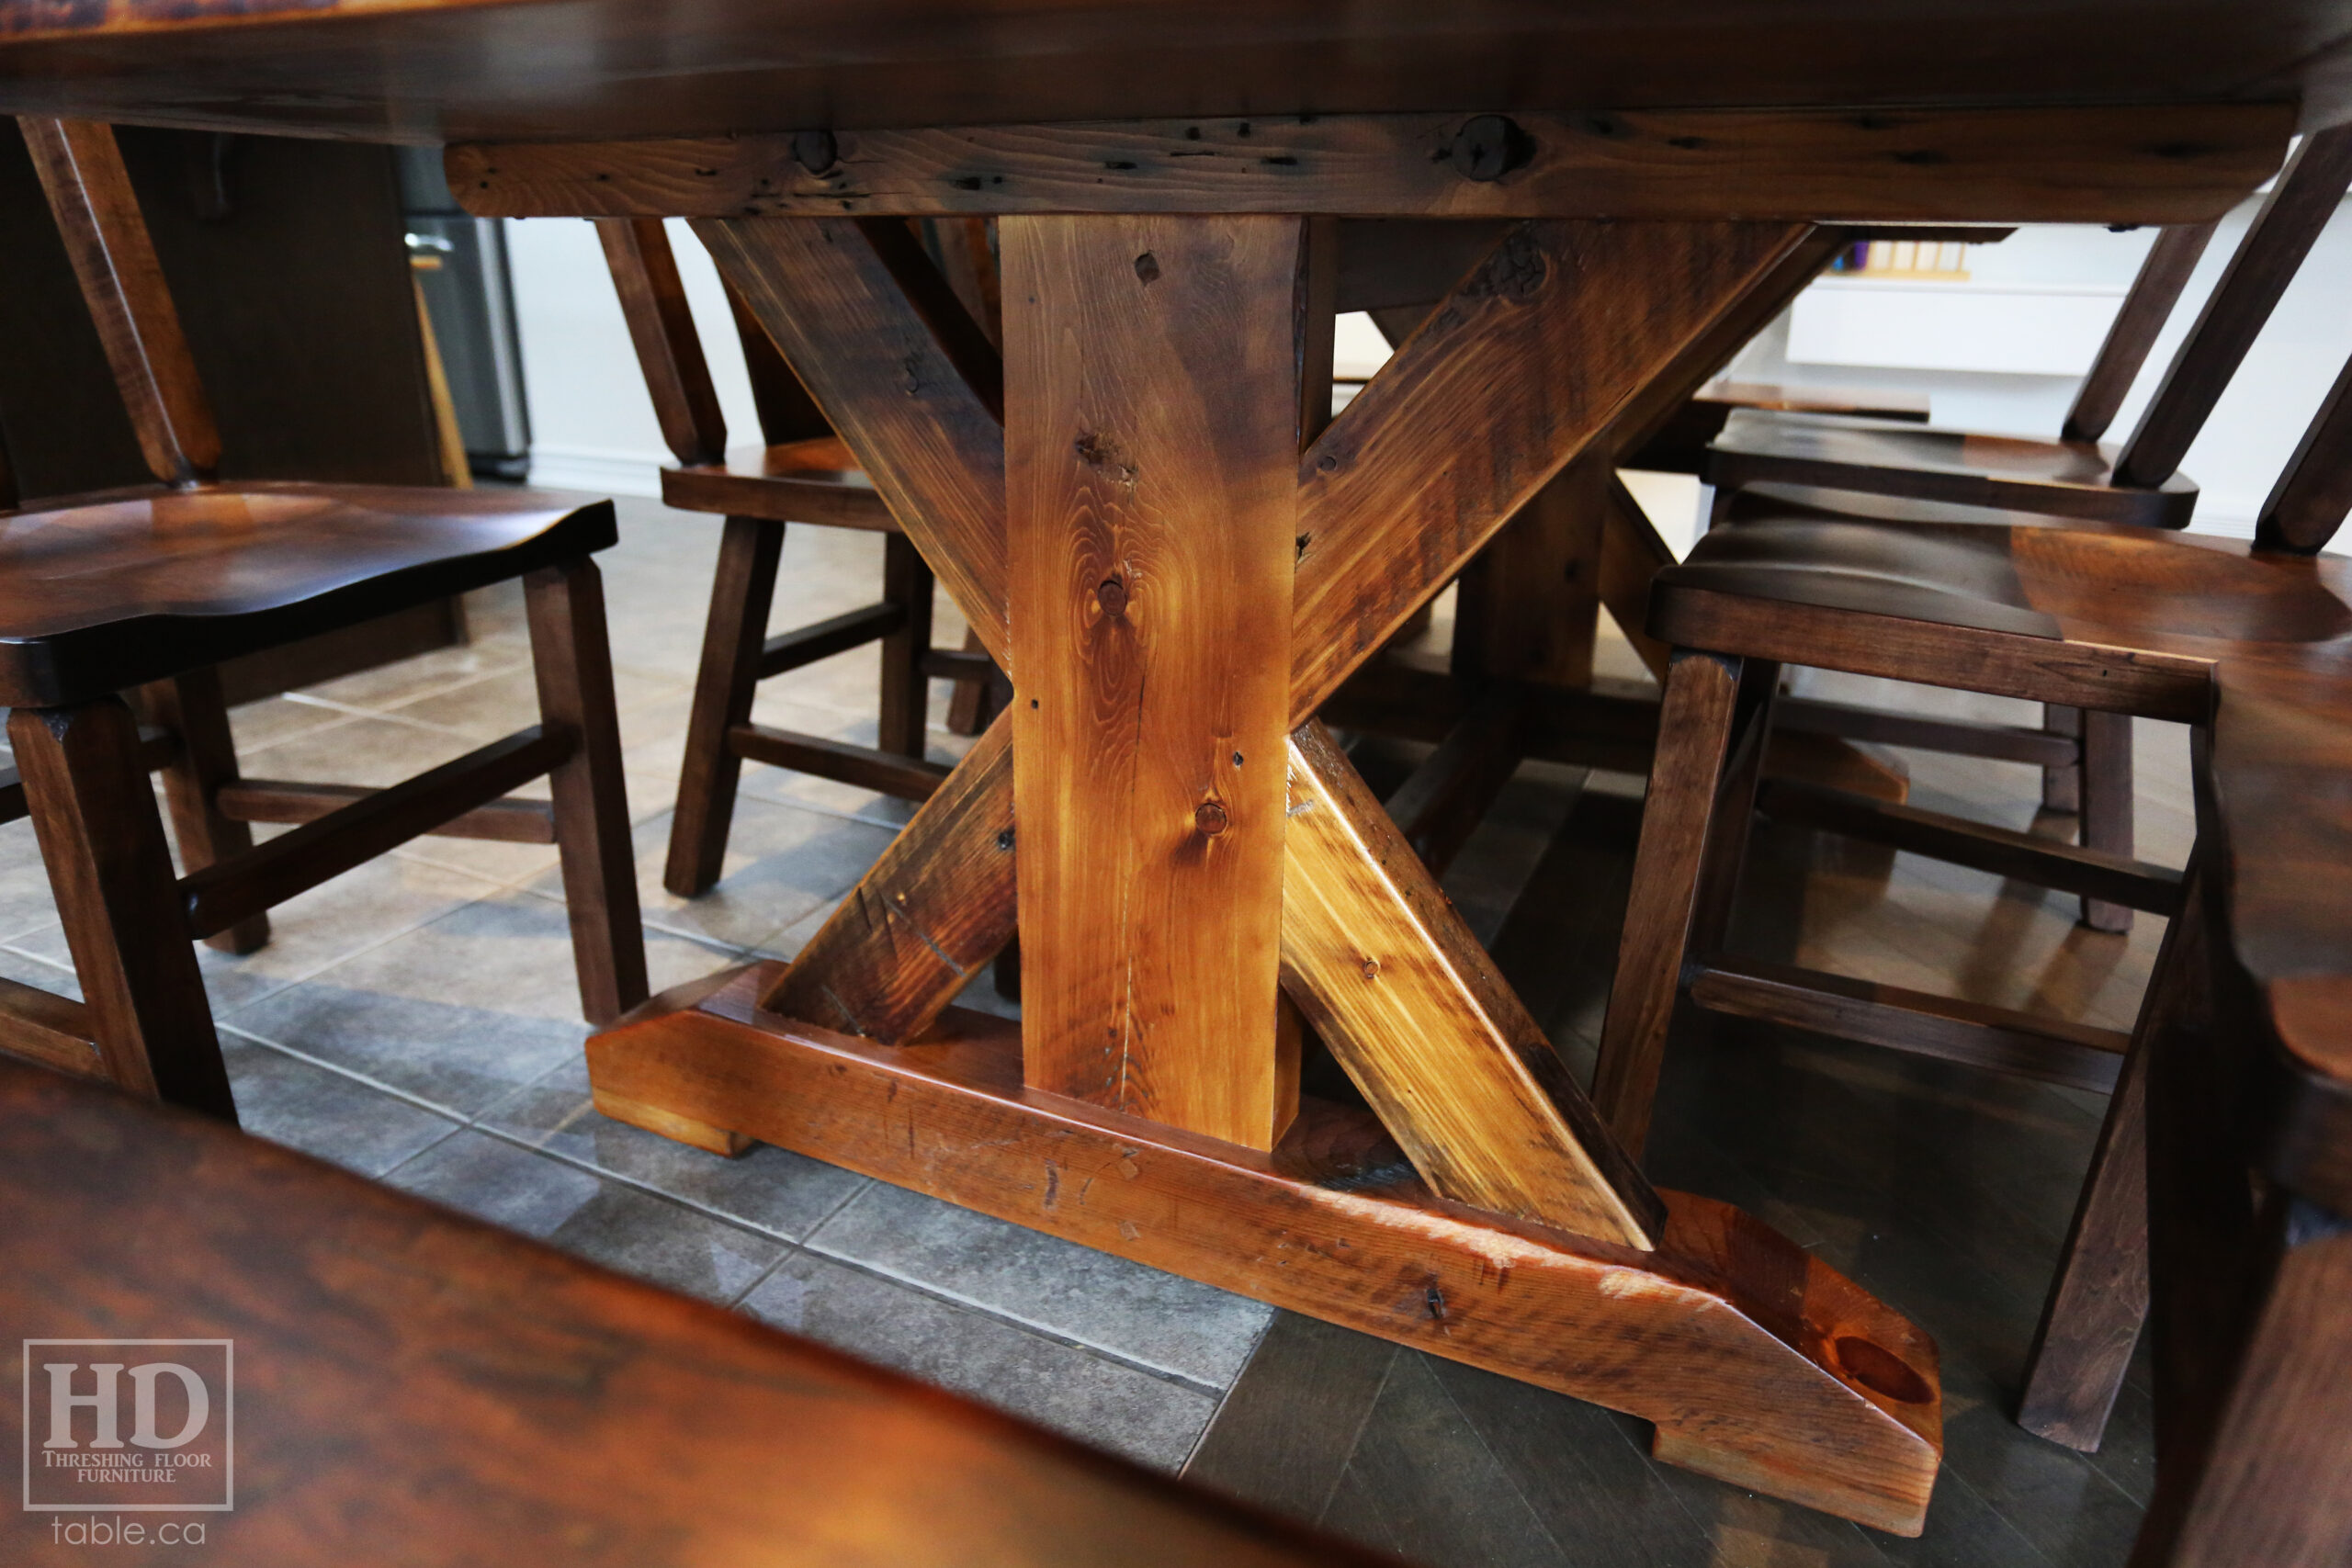 6.5' Reclaimed Sawbuck Table we made for an Orangeville Home - 42" wide - Ontario Barnwood Old Growth Hemlock Threshing Floor Construction - Original edges & distressing maintained - Premium epoxy + matte polyurethane finish - [2] Matching Reclaimed Wood Benches / Trestle Base - [6] Plank Back Chairs / Wormy Maple - Stained Colour of Table / Polyurethane clearcoat finish - www.table.ca